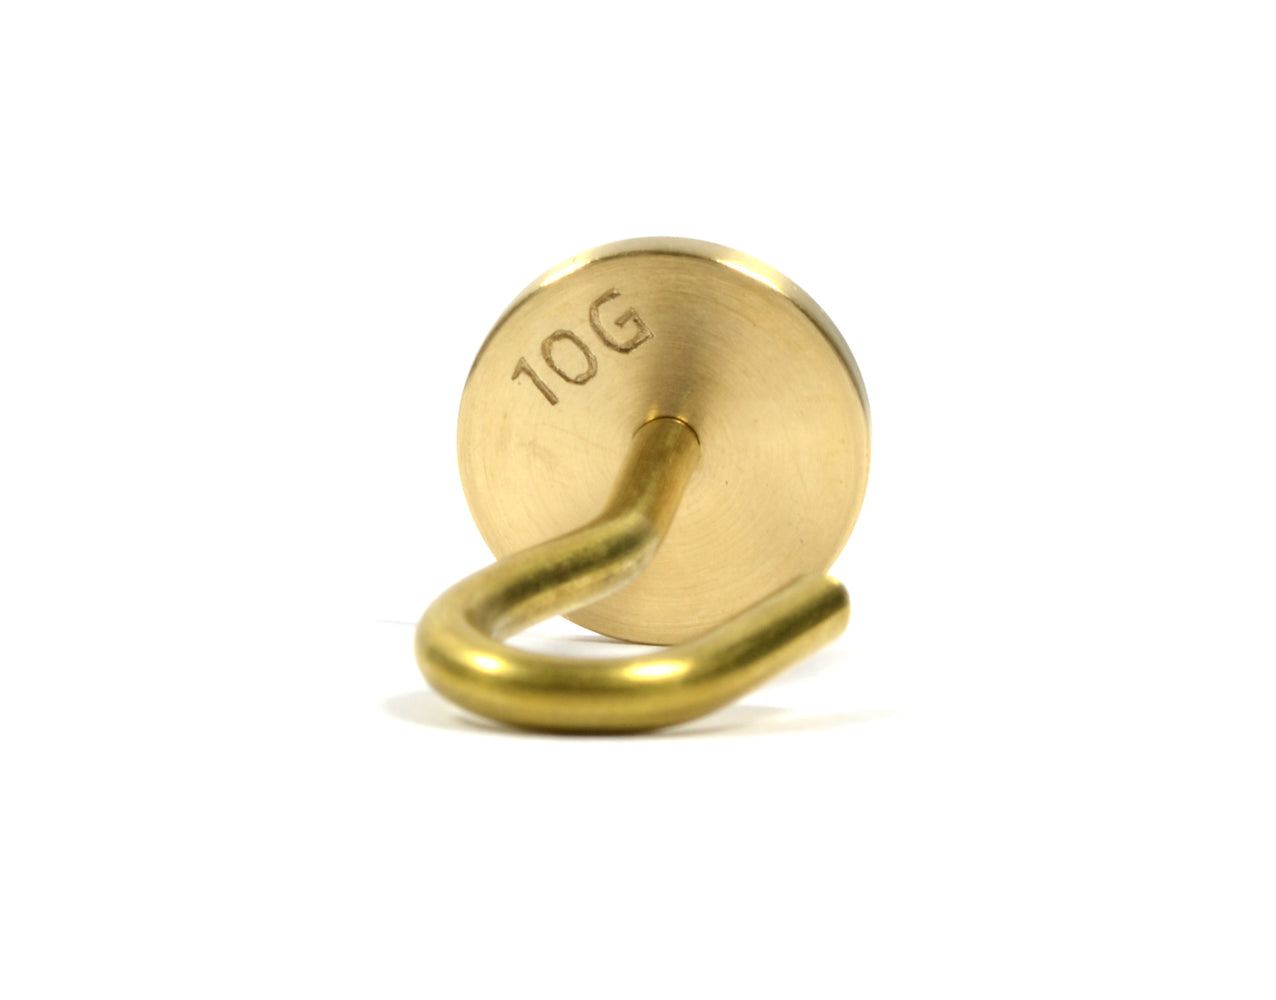 Eisco Labs Individual Hooked Weights - Brass - 10g